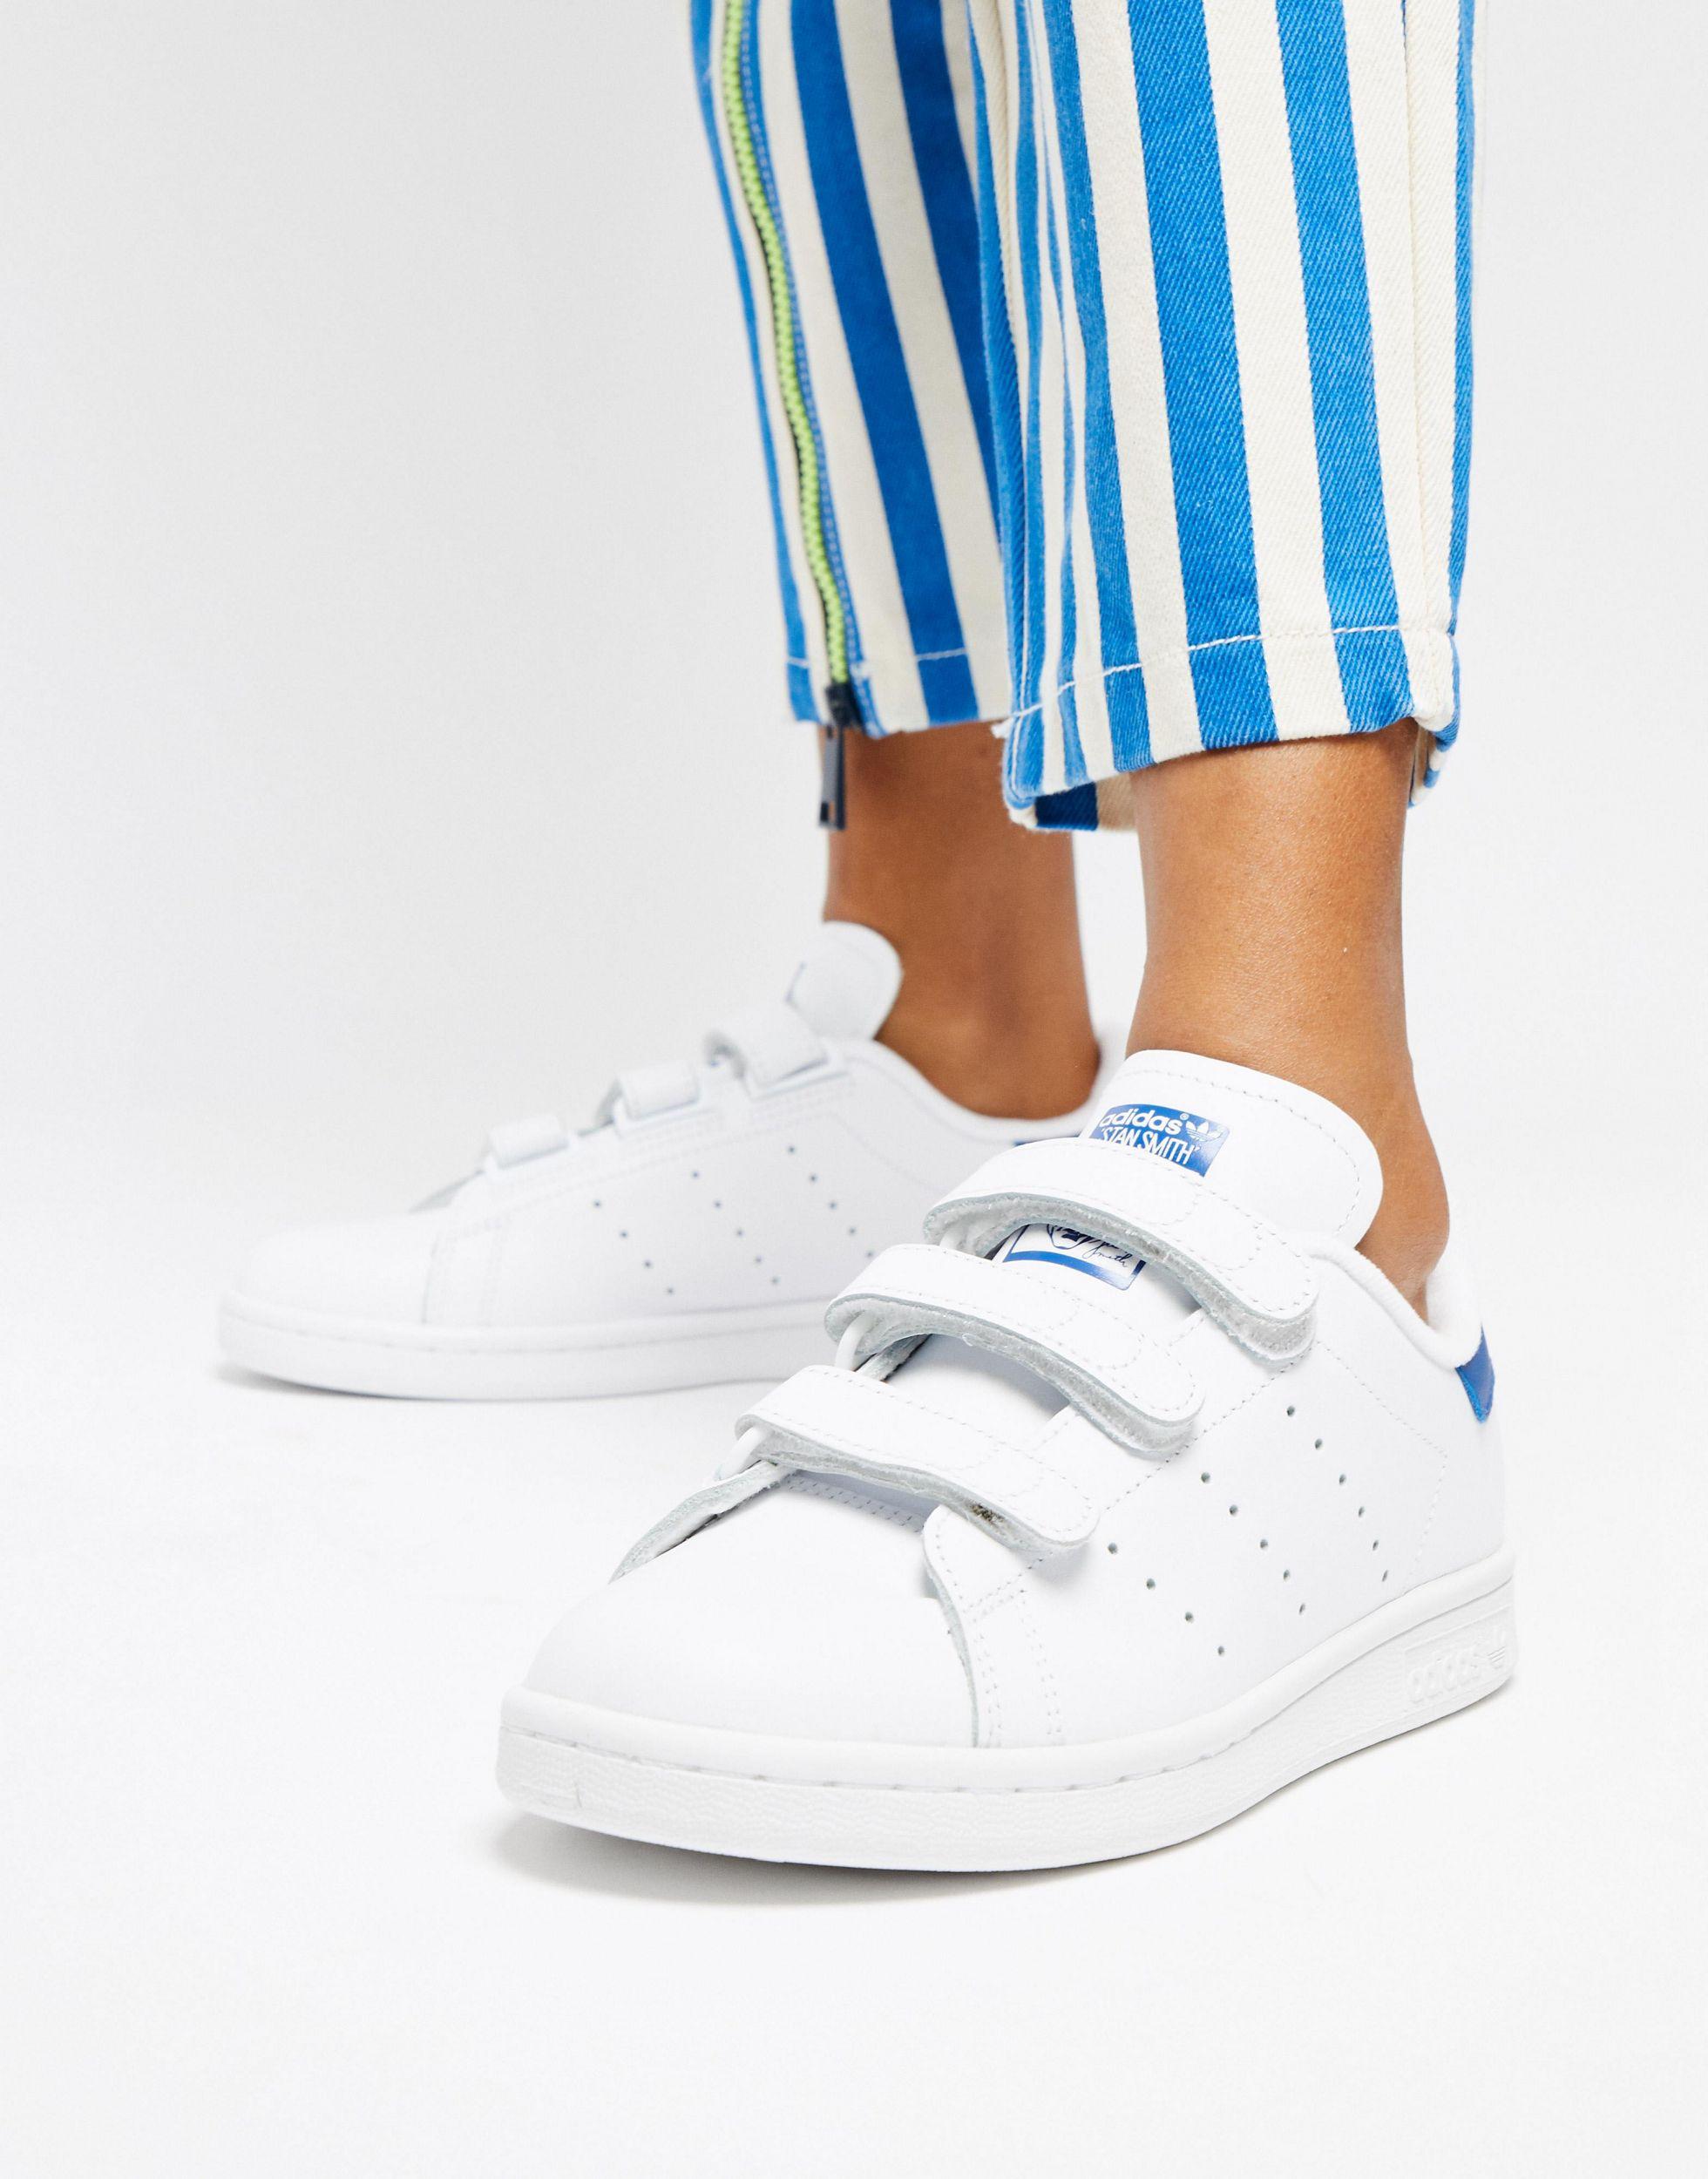 udlejeren turnering hjerne adidas Originals Stan Smith Velcro Trainers in White | Lyst